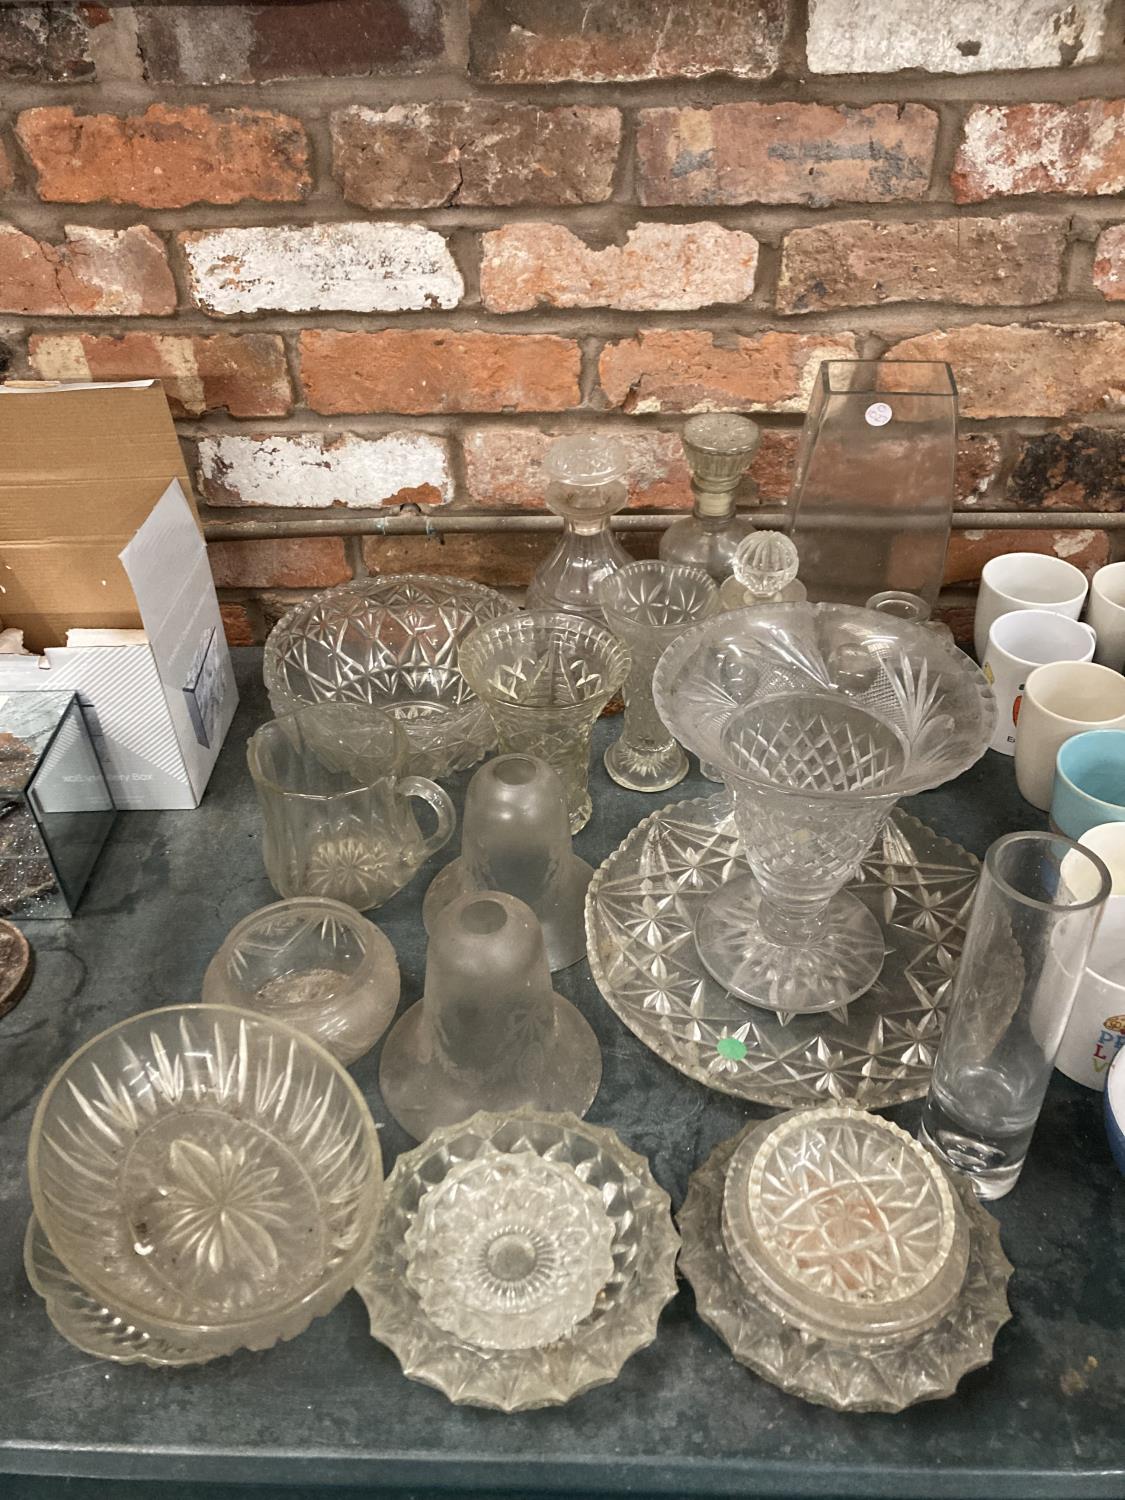 A LARGE QUANTITY OF VINTAGE GLASSWARE TO INCLUDE DECANTERS, VASES, BOWLS, LAMP SHADES, ETC